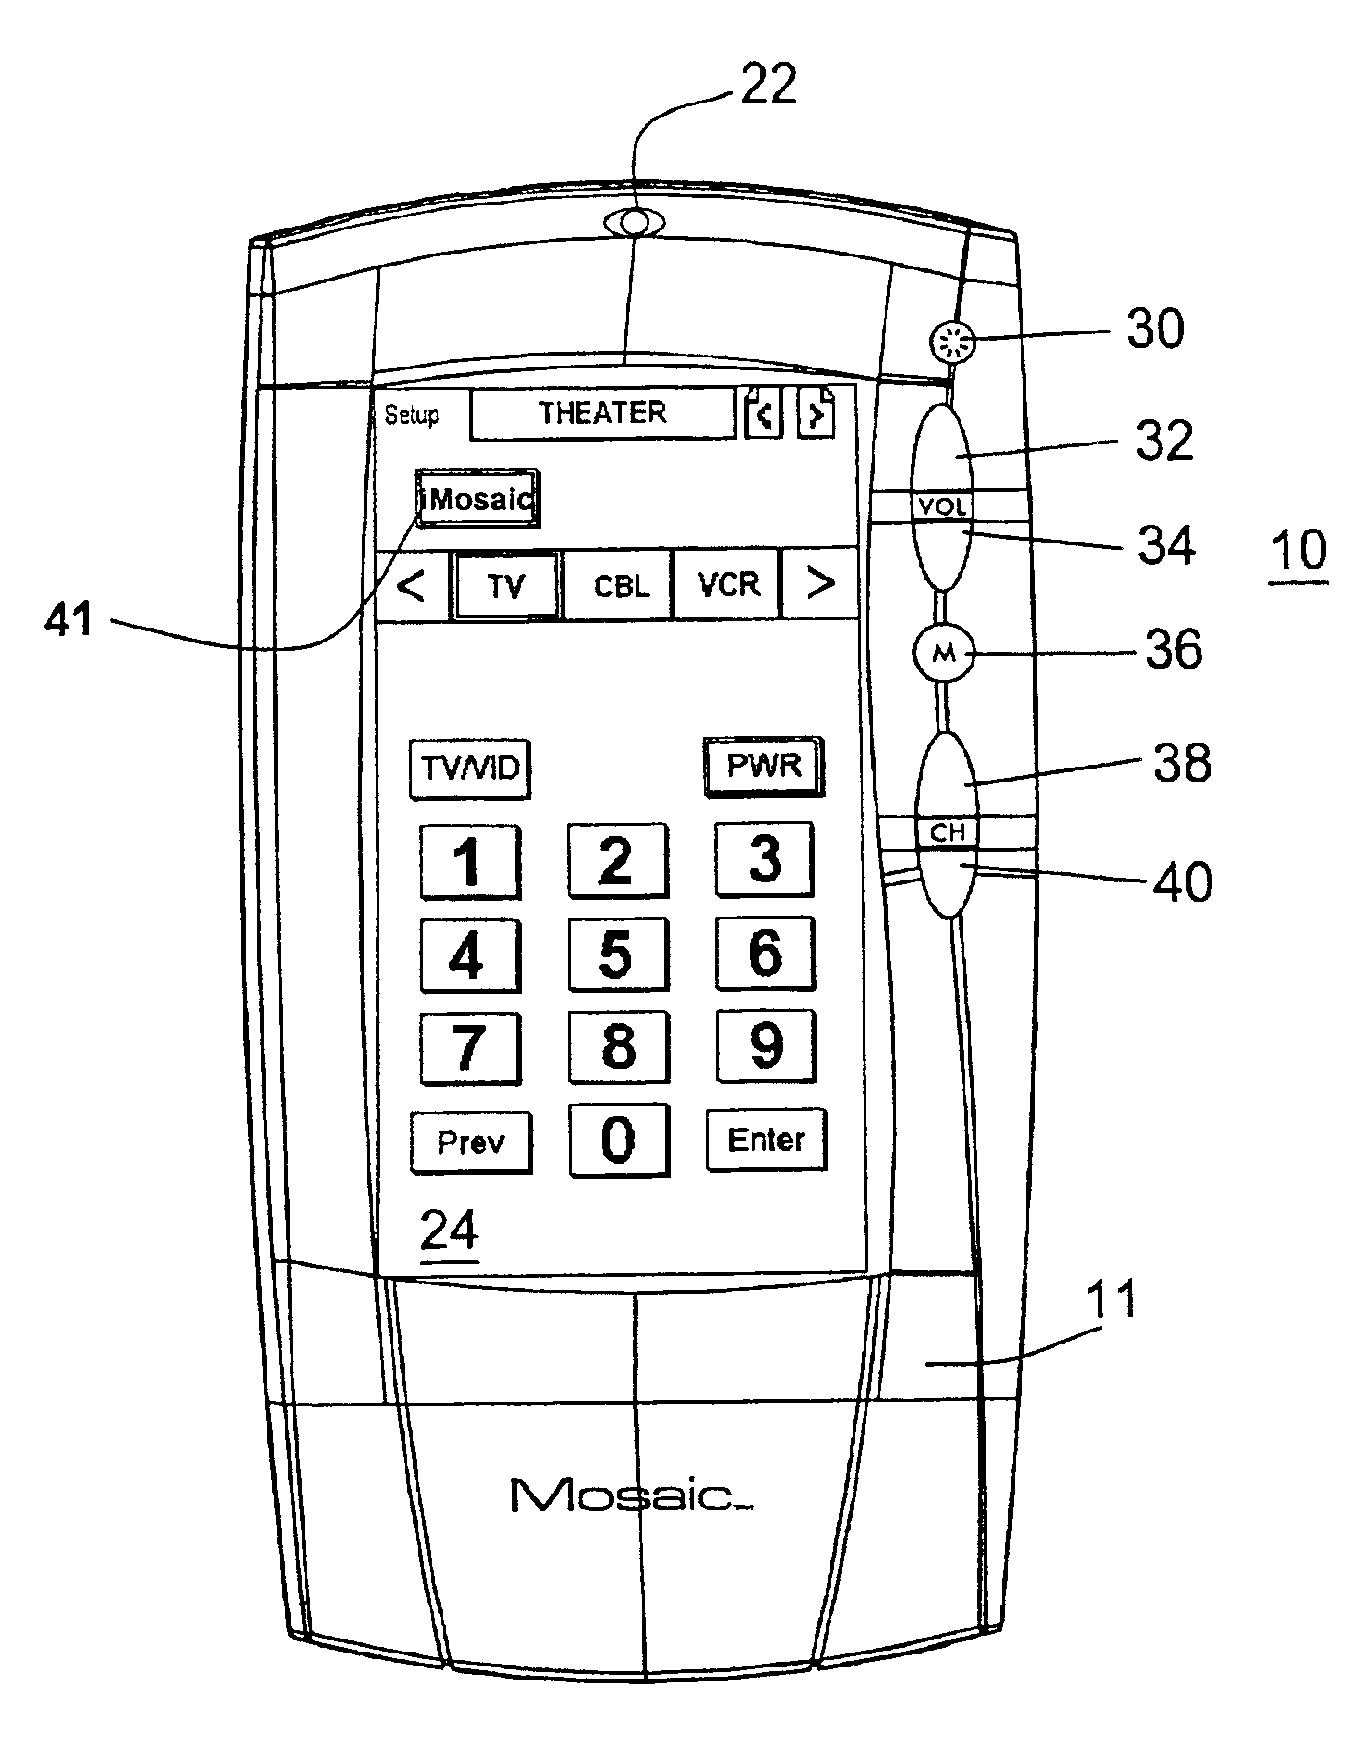 Hand held device having a browser application